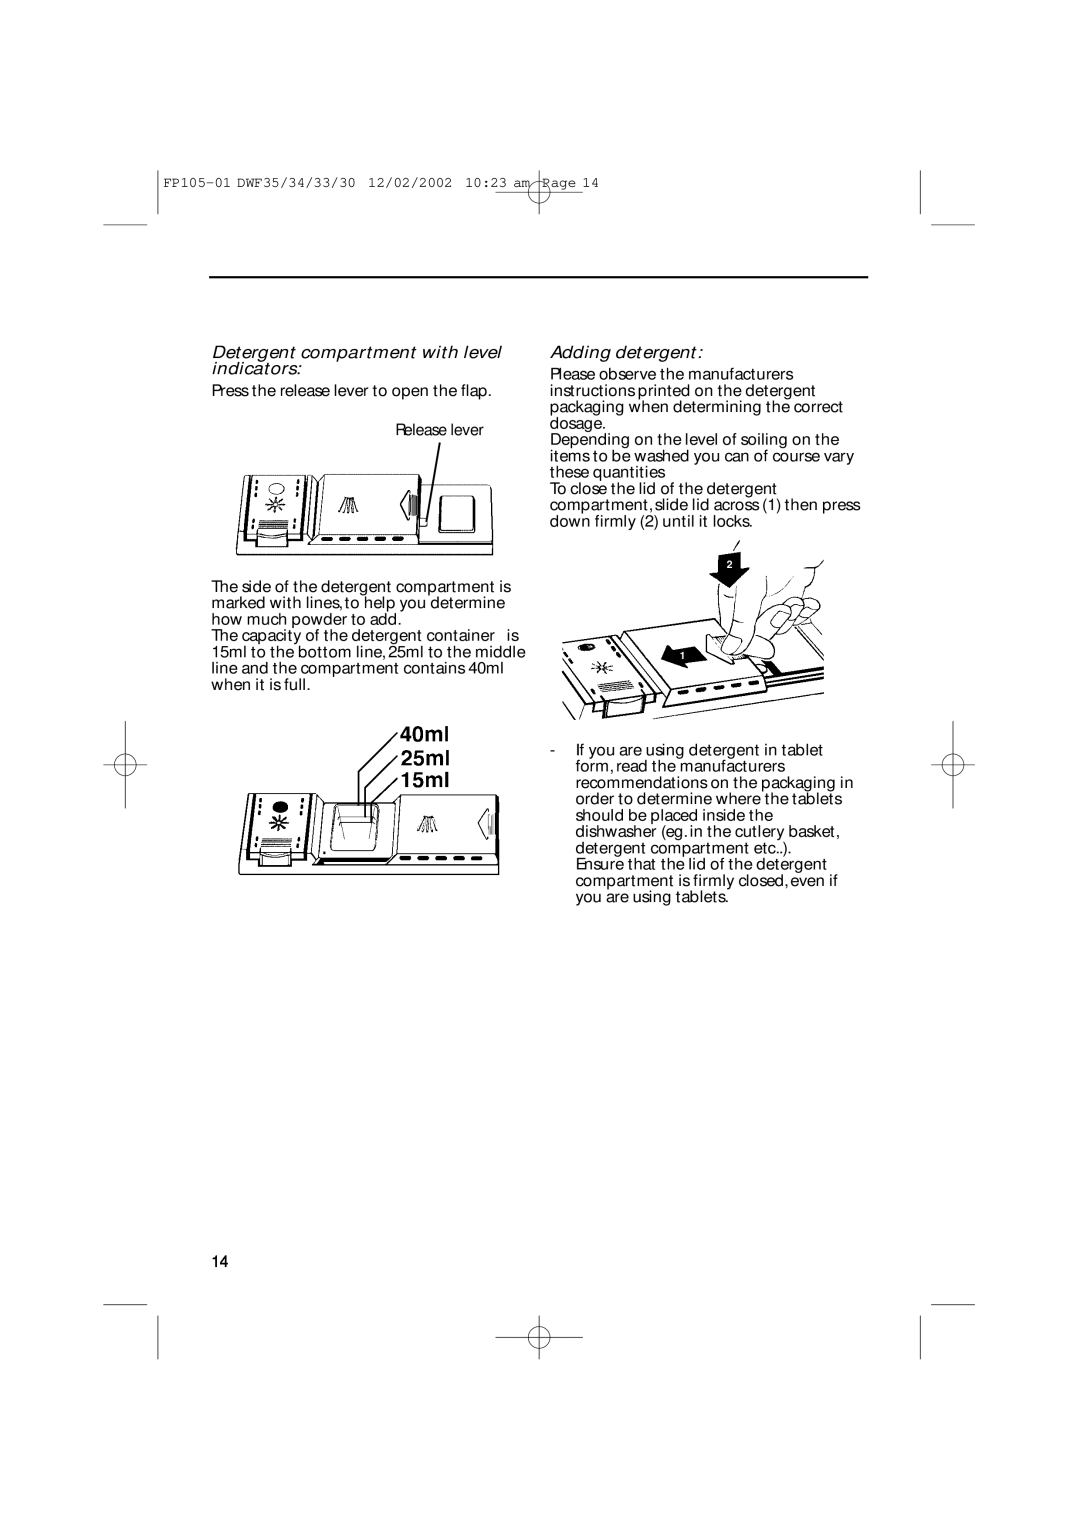 Hotpoint DWF30, DWF35, DWF34, DWF33 installation instructions Detergent compartment with level indicators, Adding detergent 